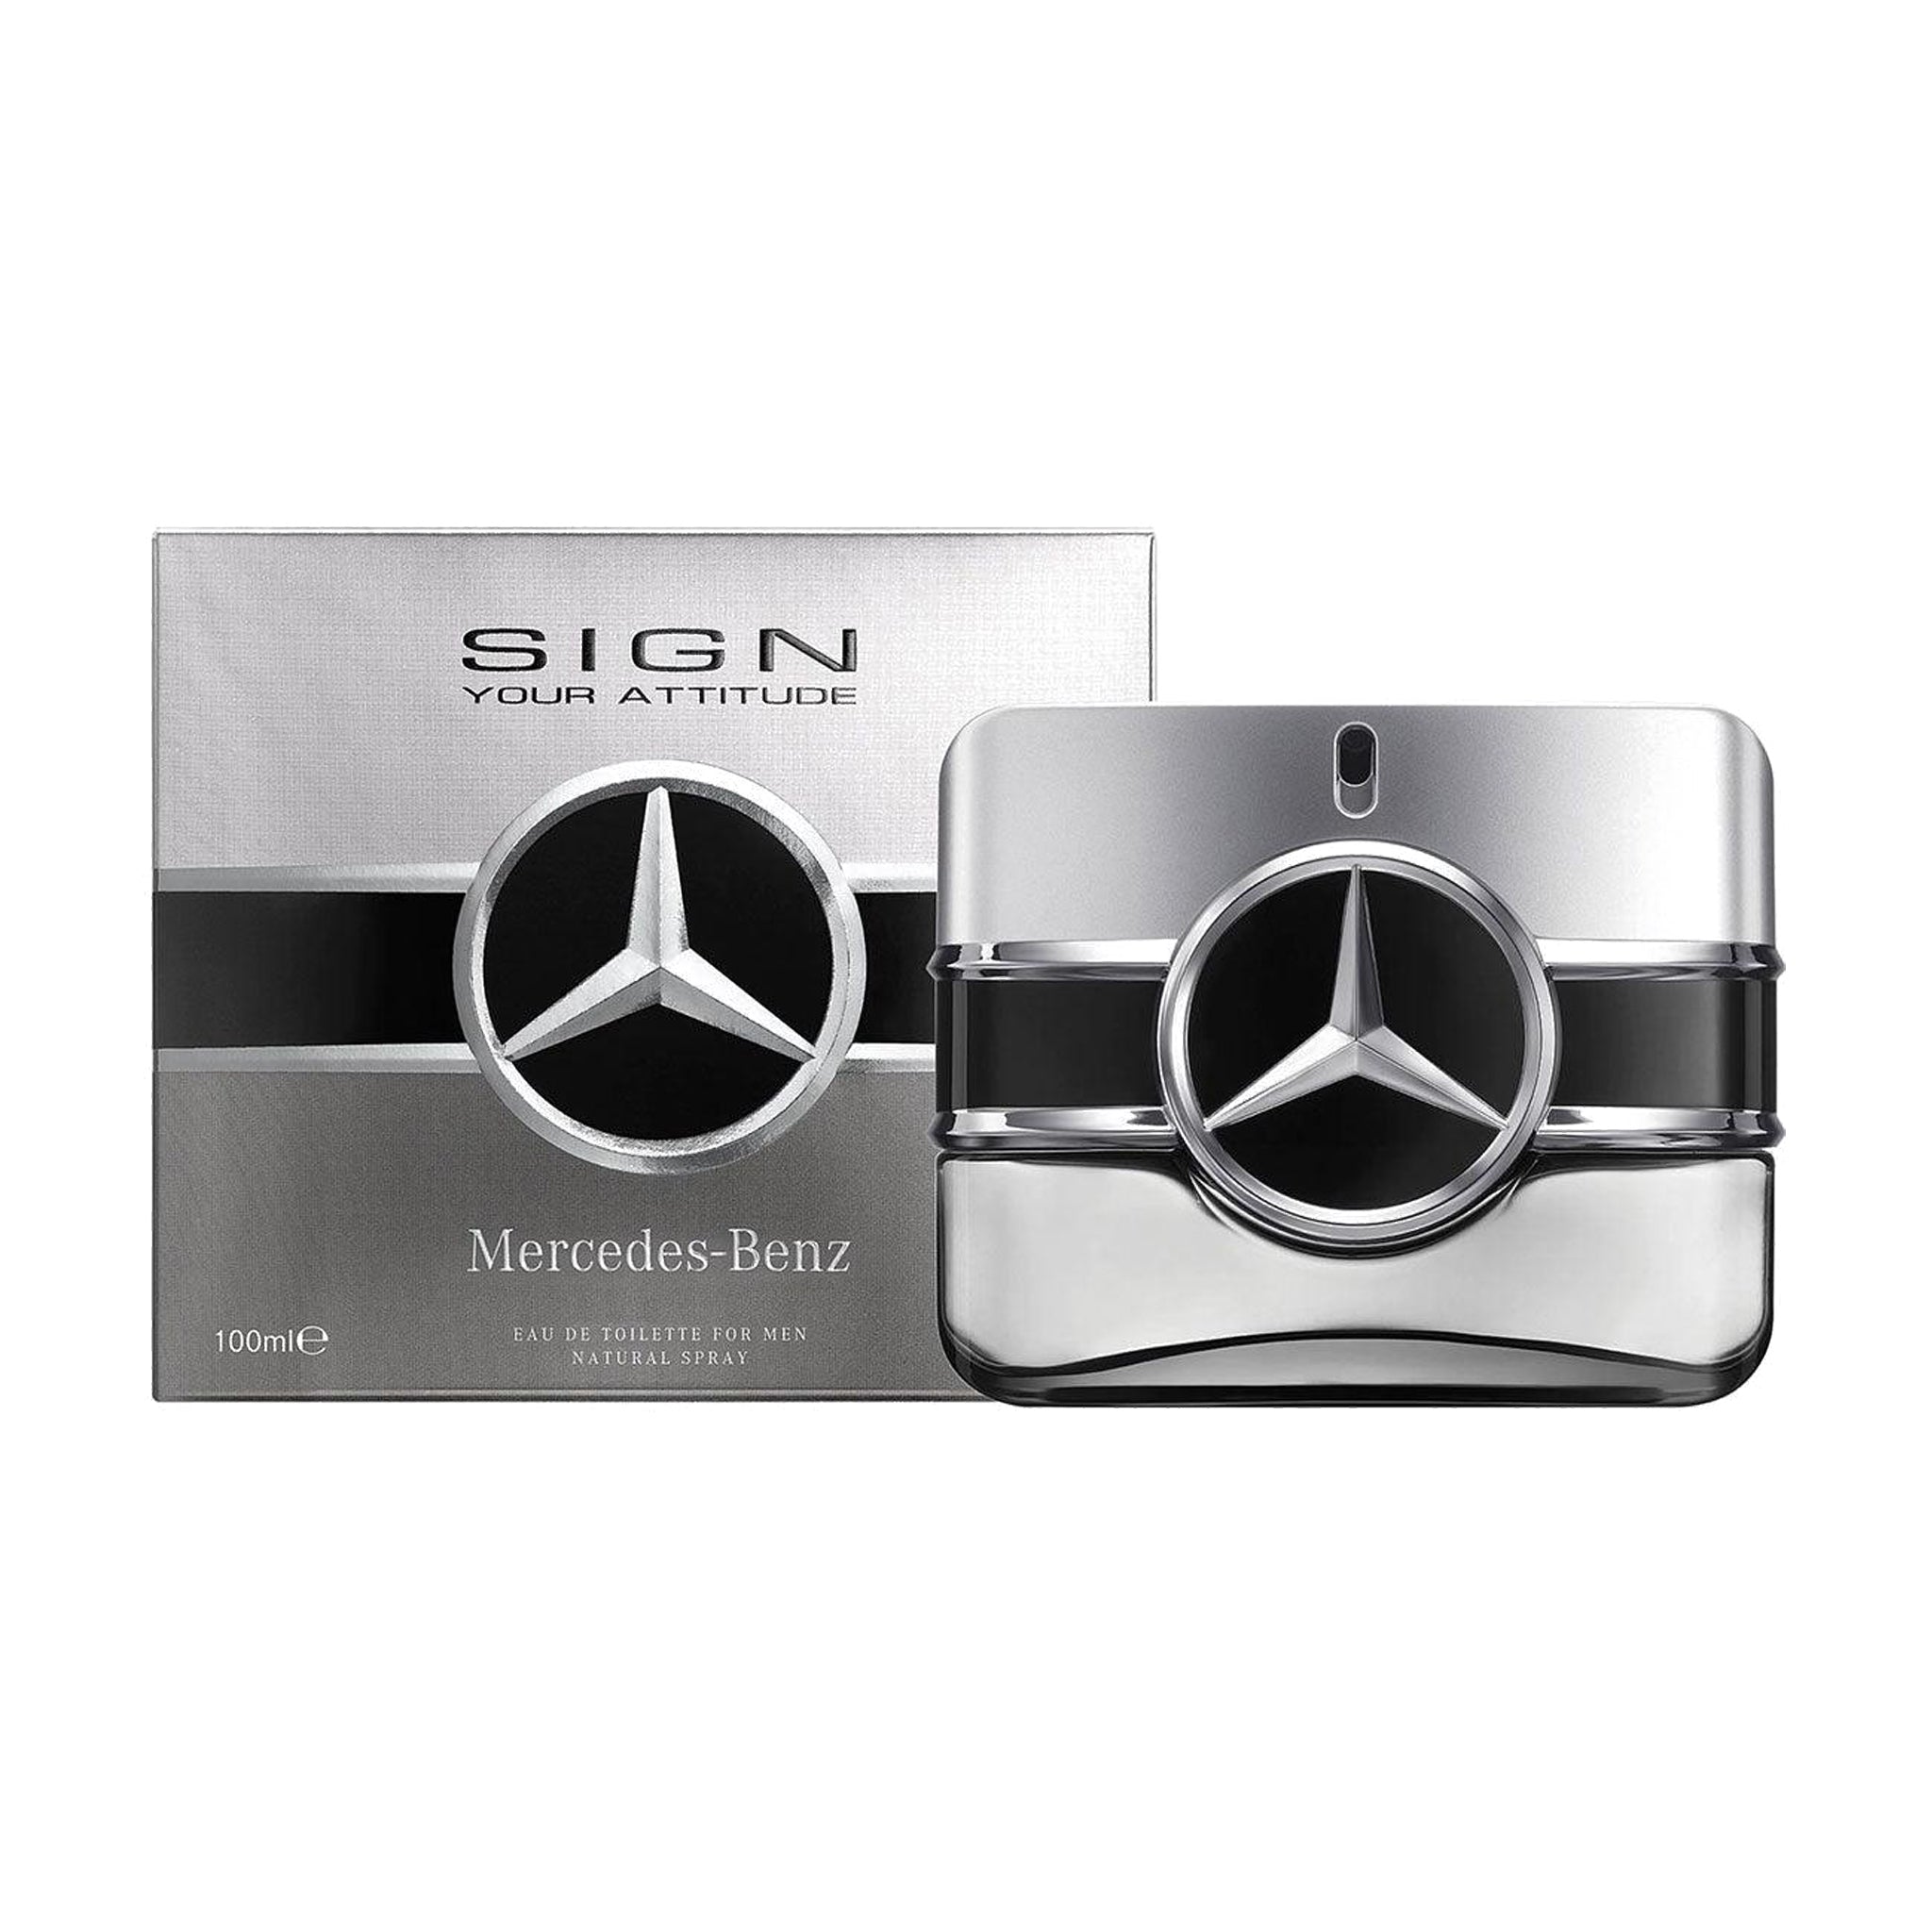 MERCEDES BENZ SELECT (M) EDT 100ML BY MERCEDES BENZ